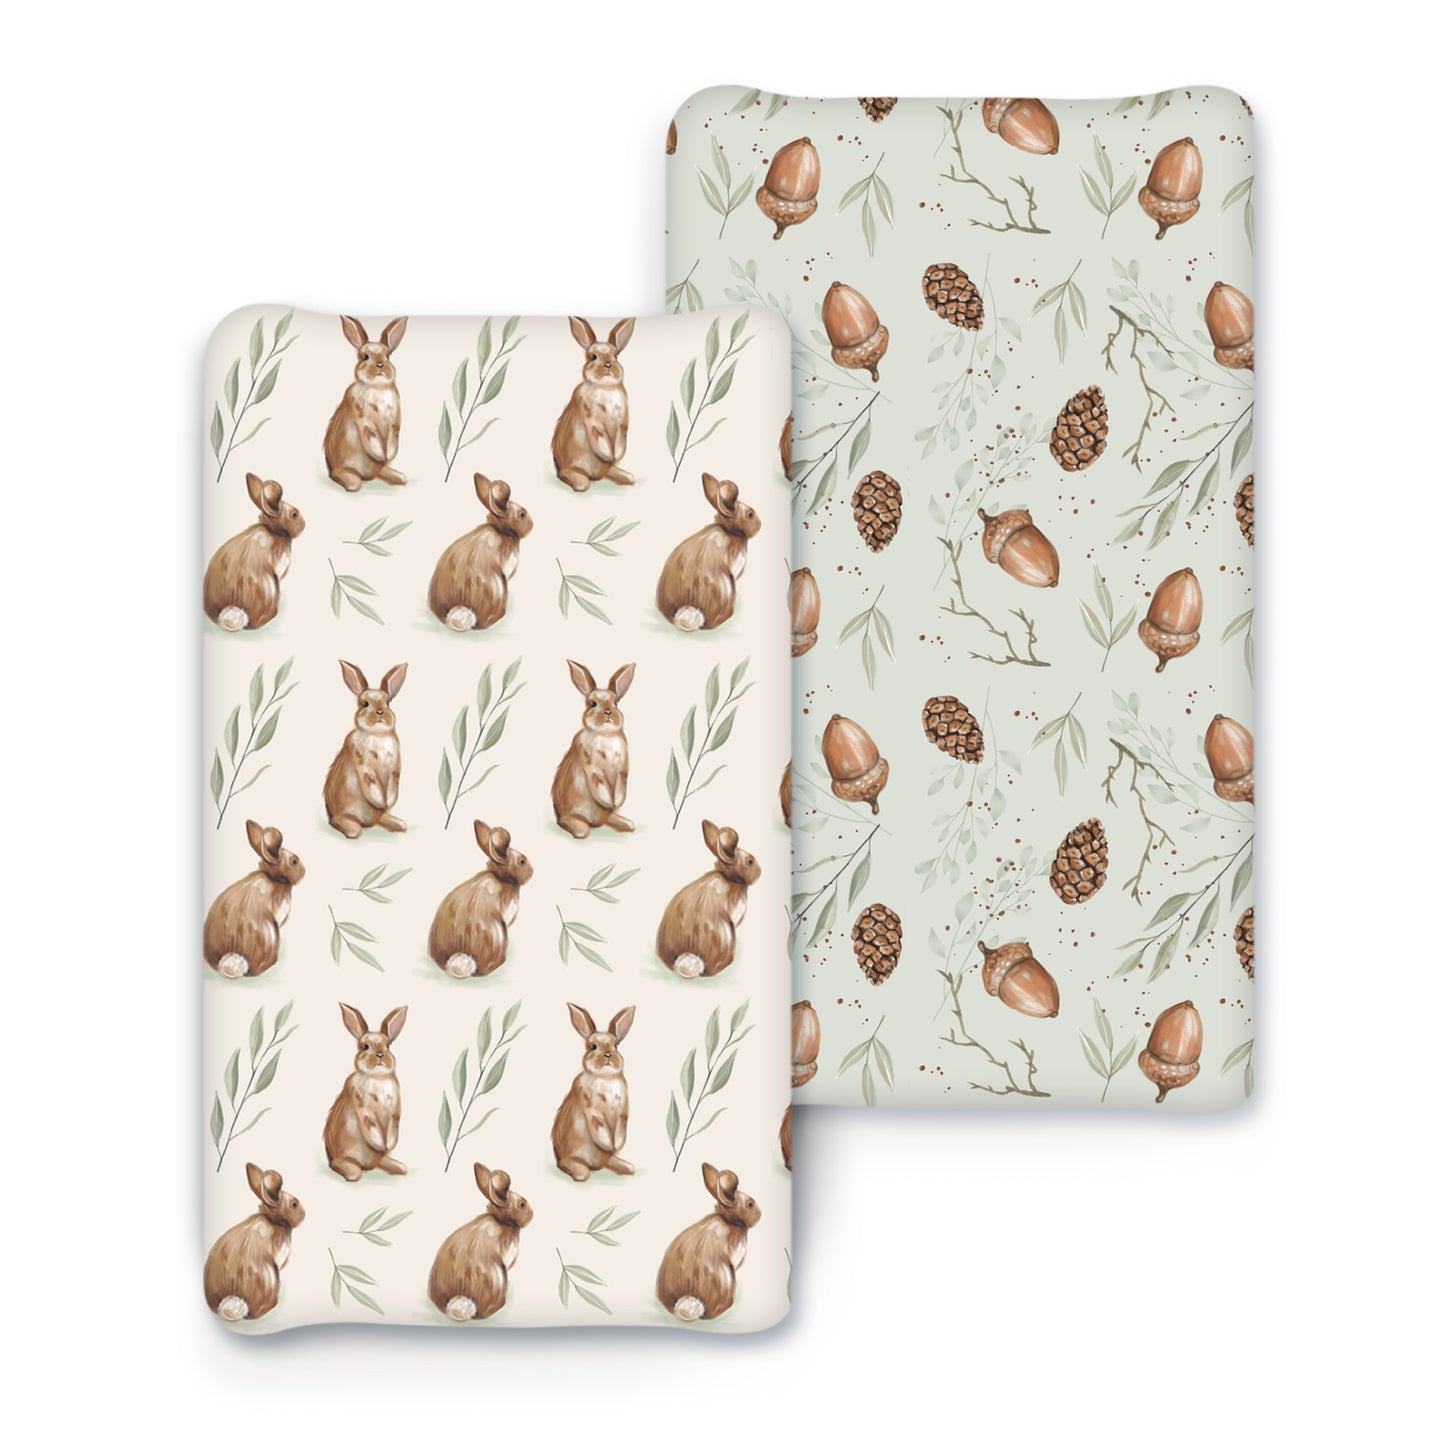 Acrabros Snug Fitted Changing Pad Cover Set Rabbit Nuts